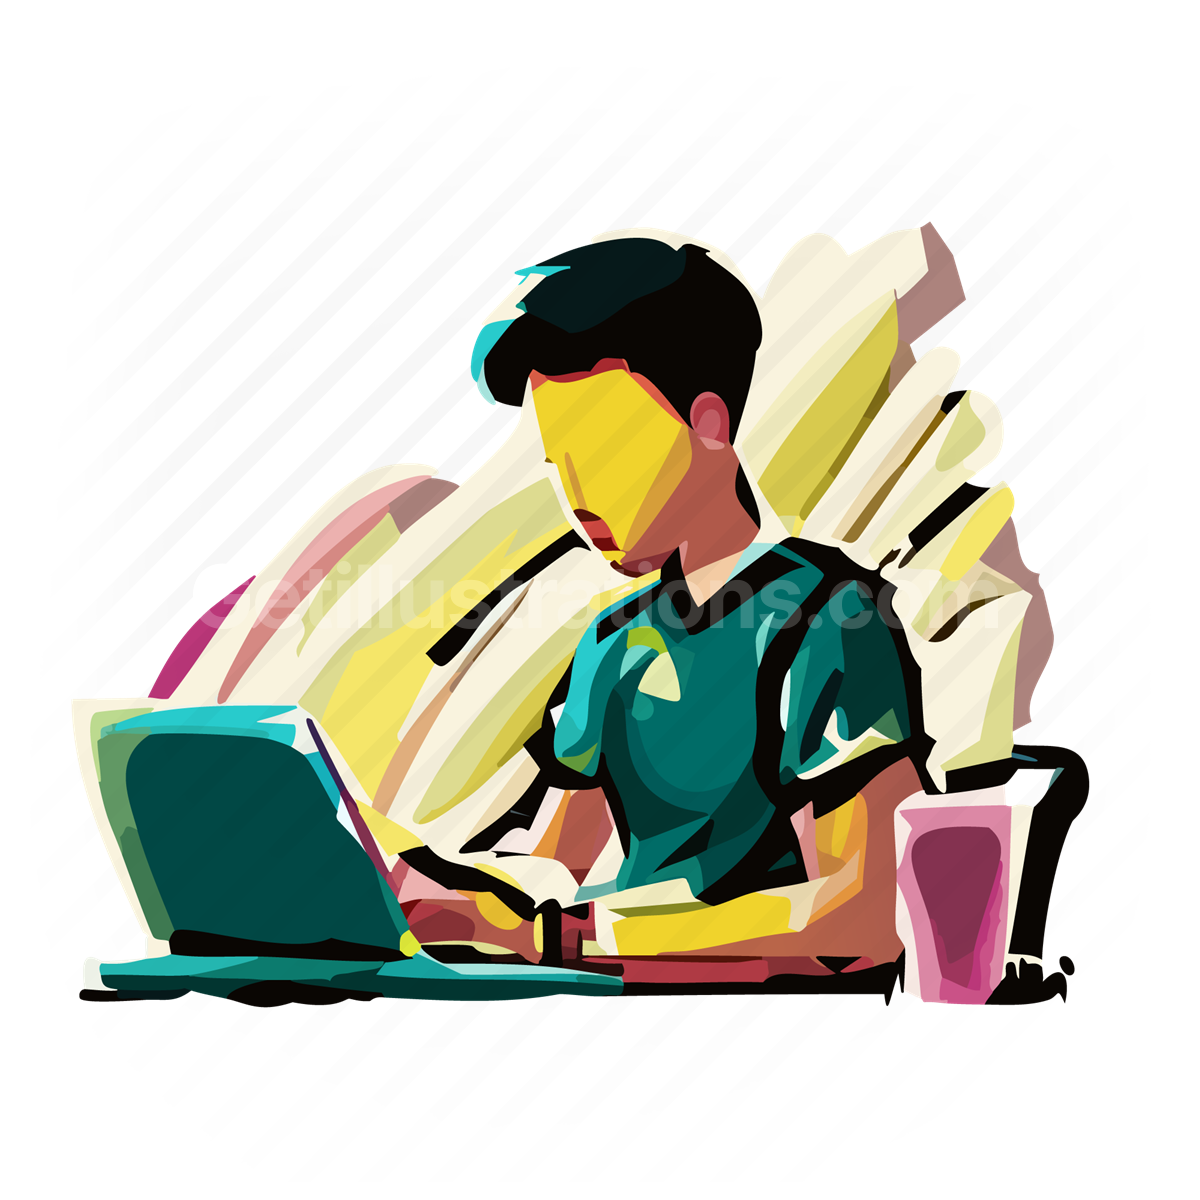 Work and Employment  illustration